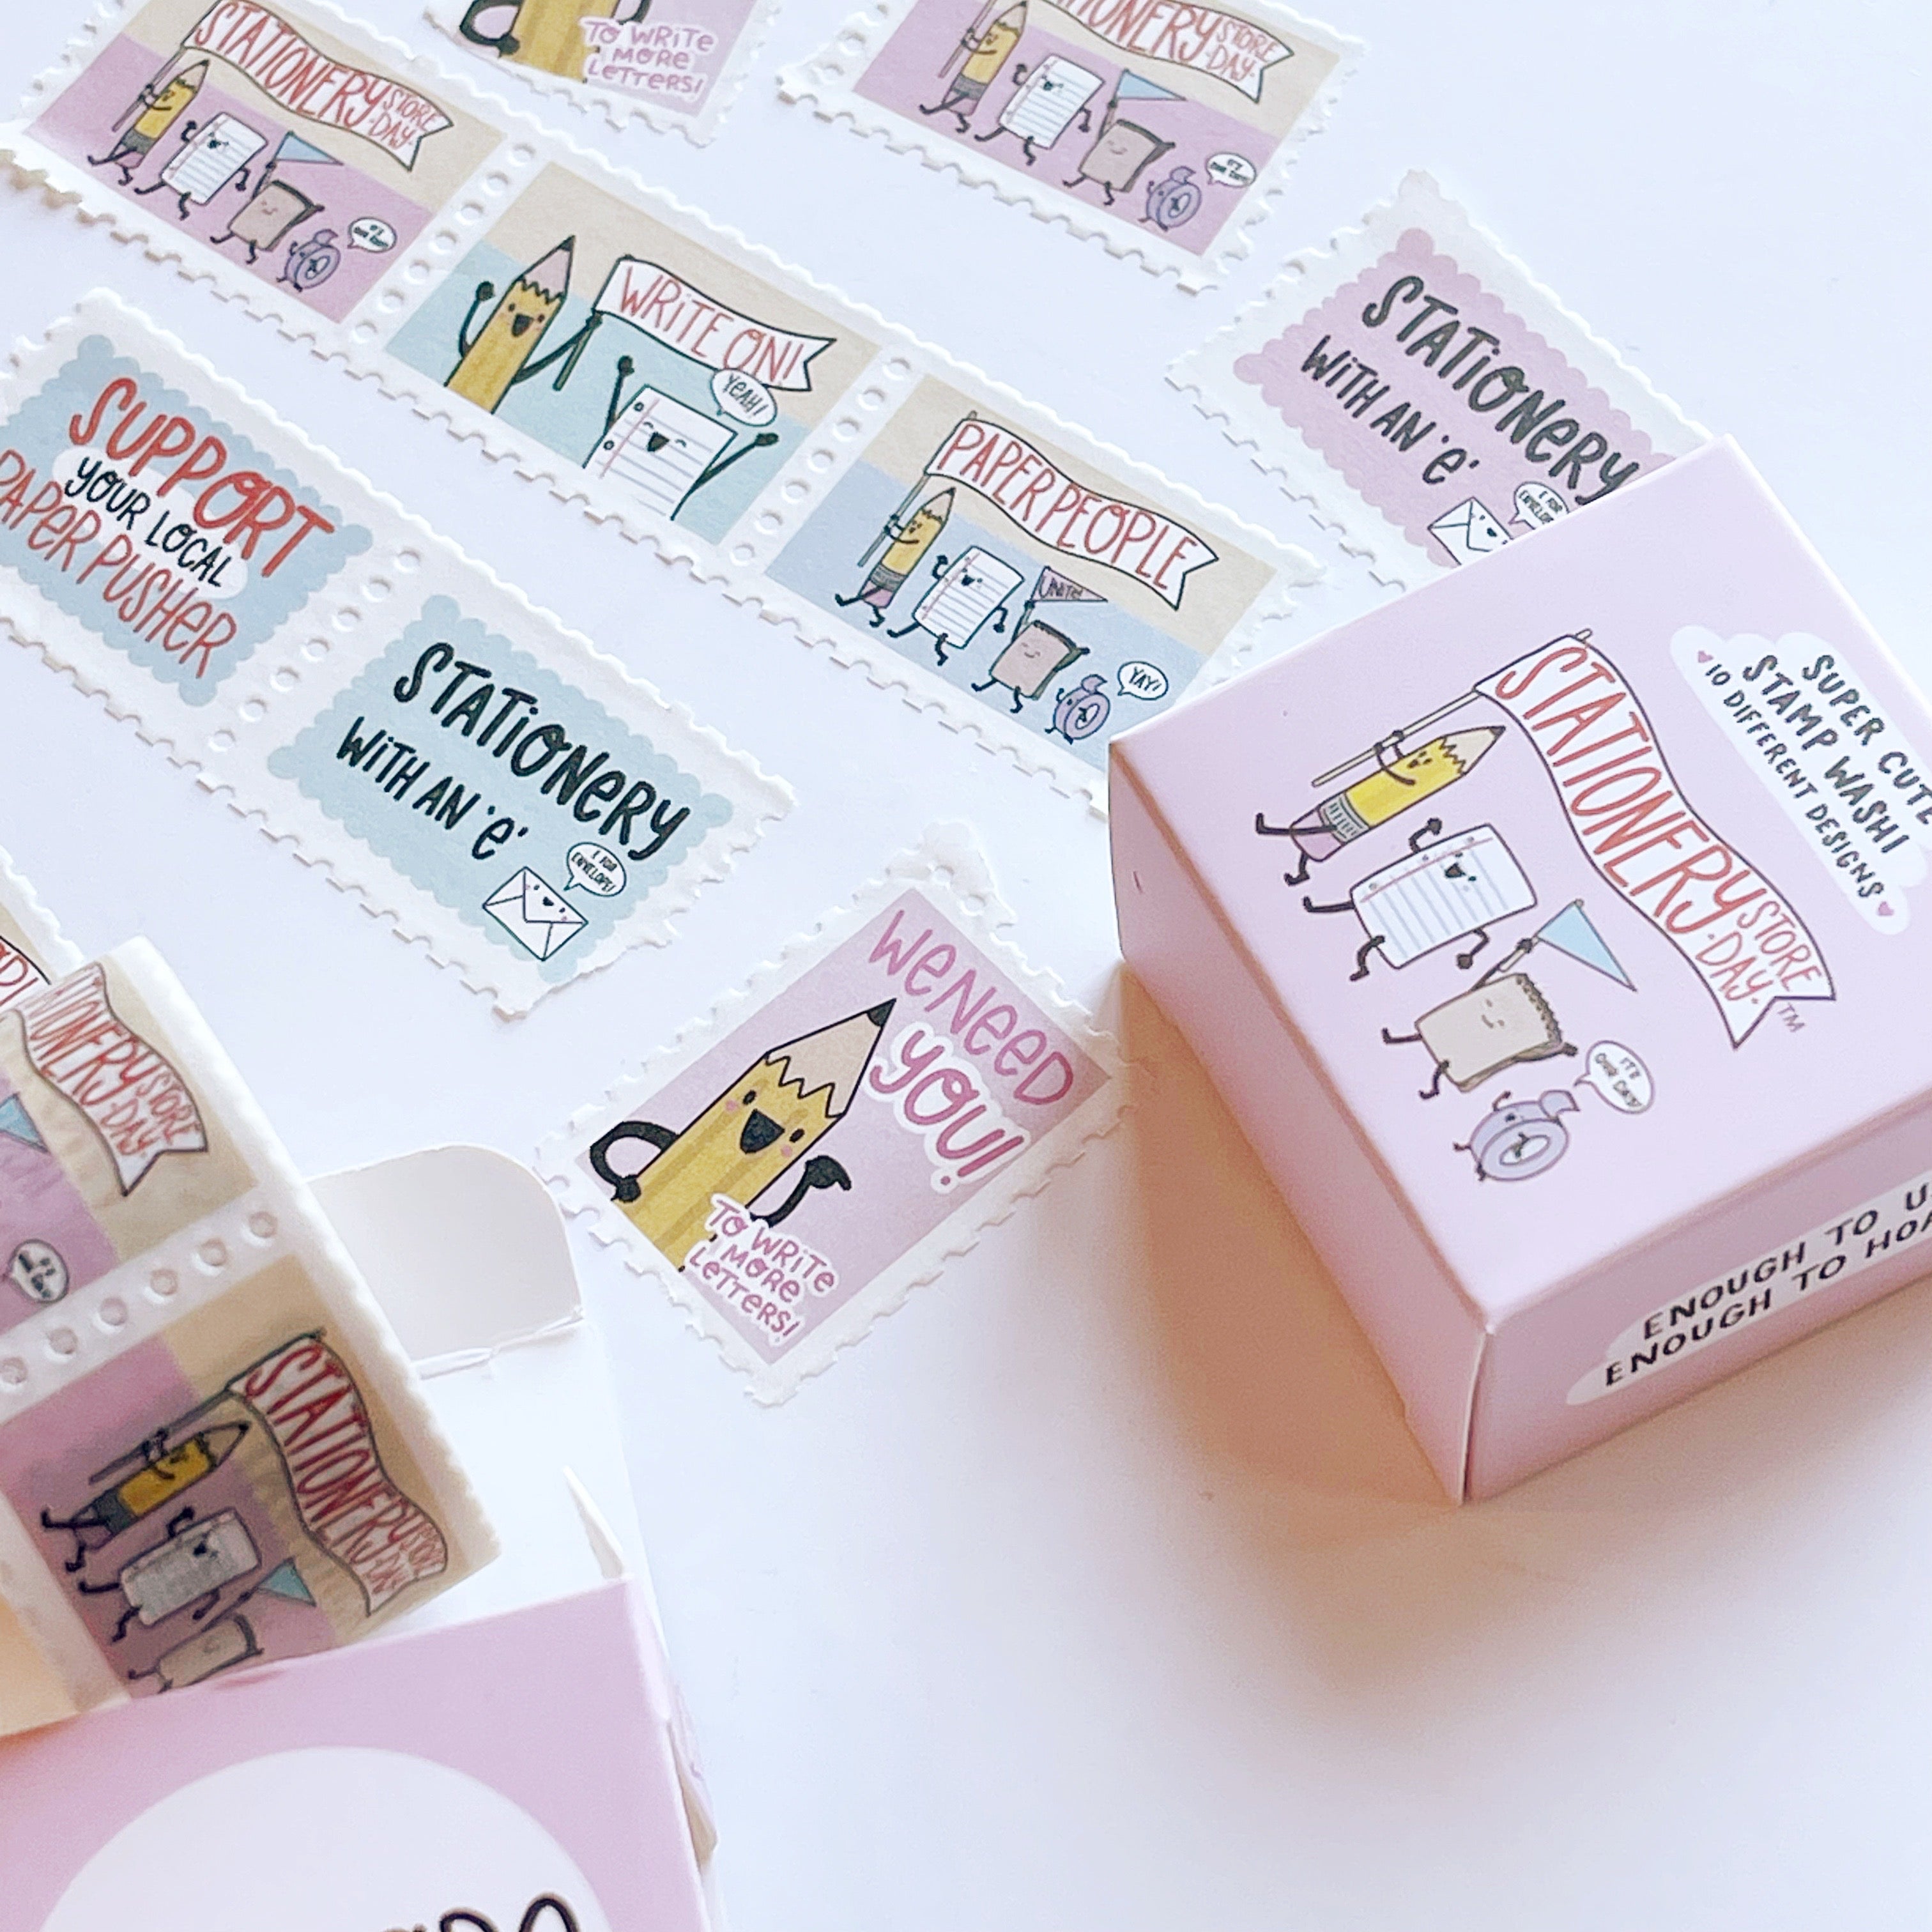 Image of stamp Washi tape with pink, blue and white background with image of the Stationery Store Day street team on each stamp.